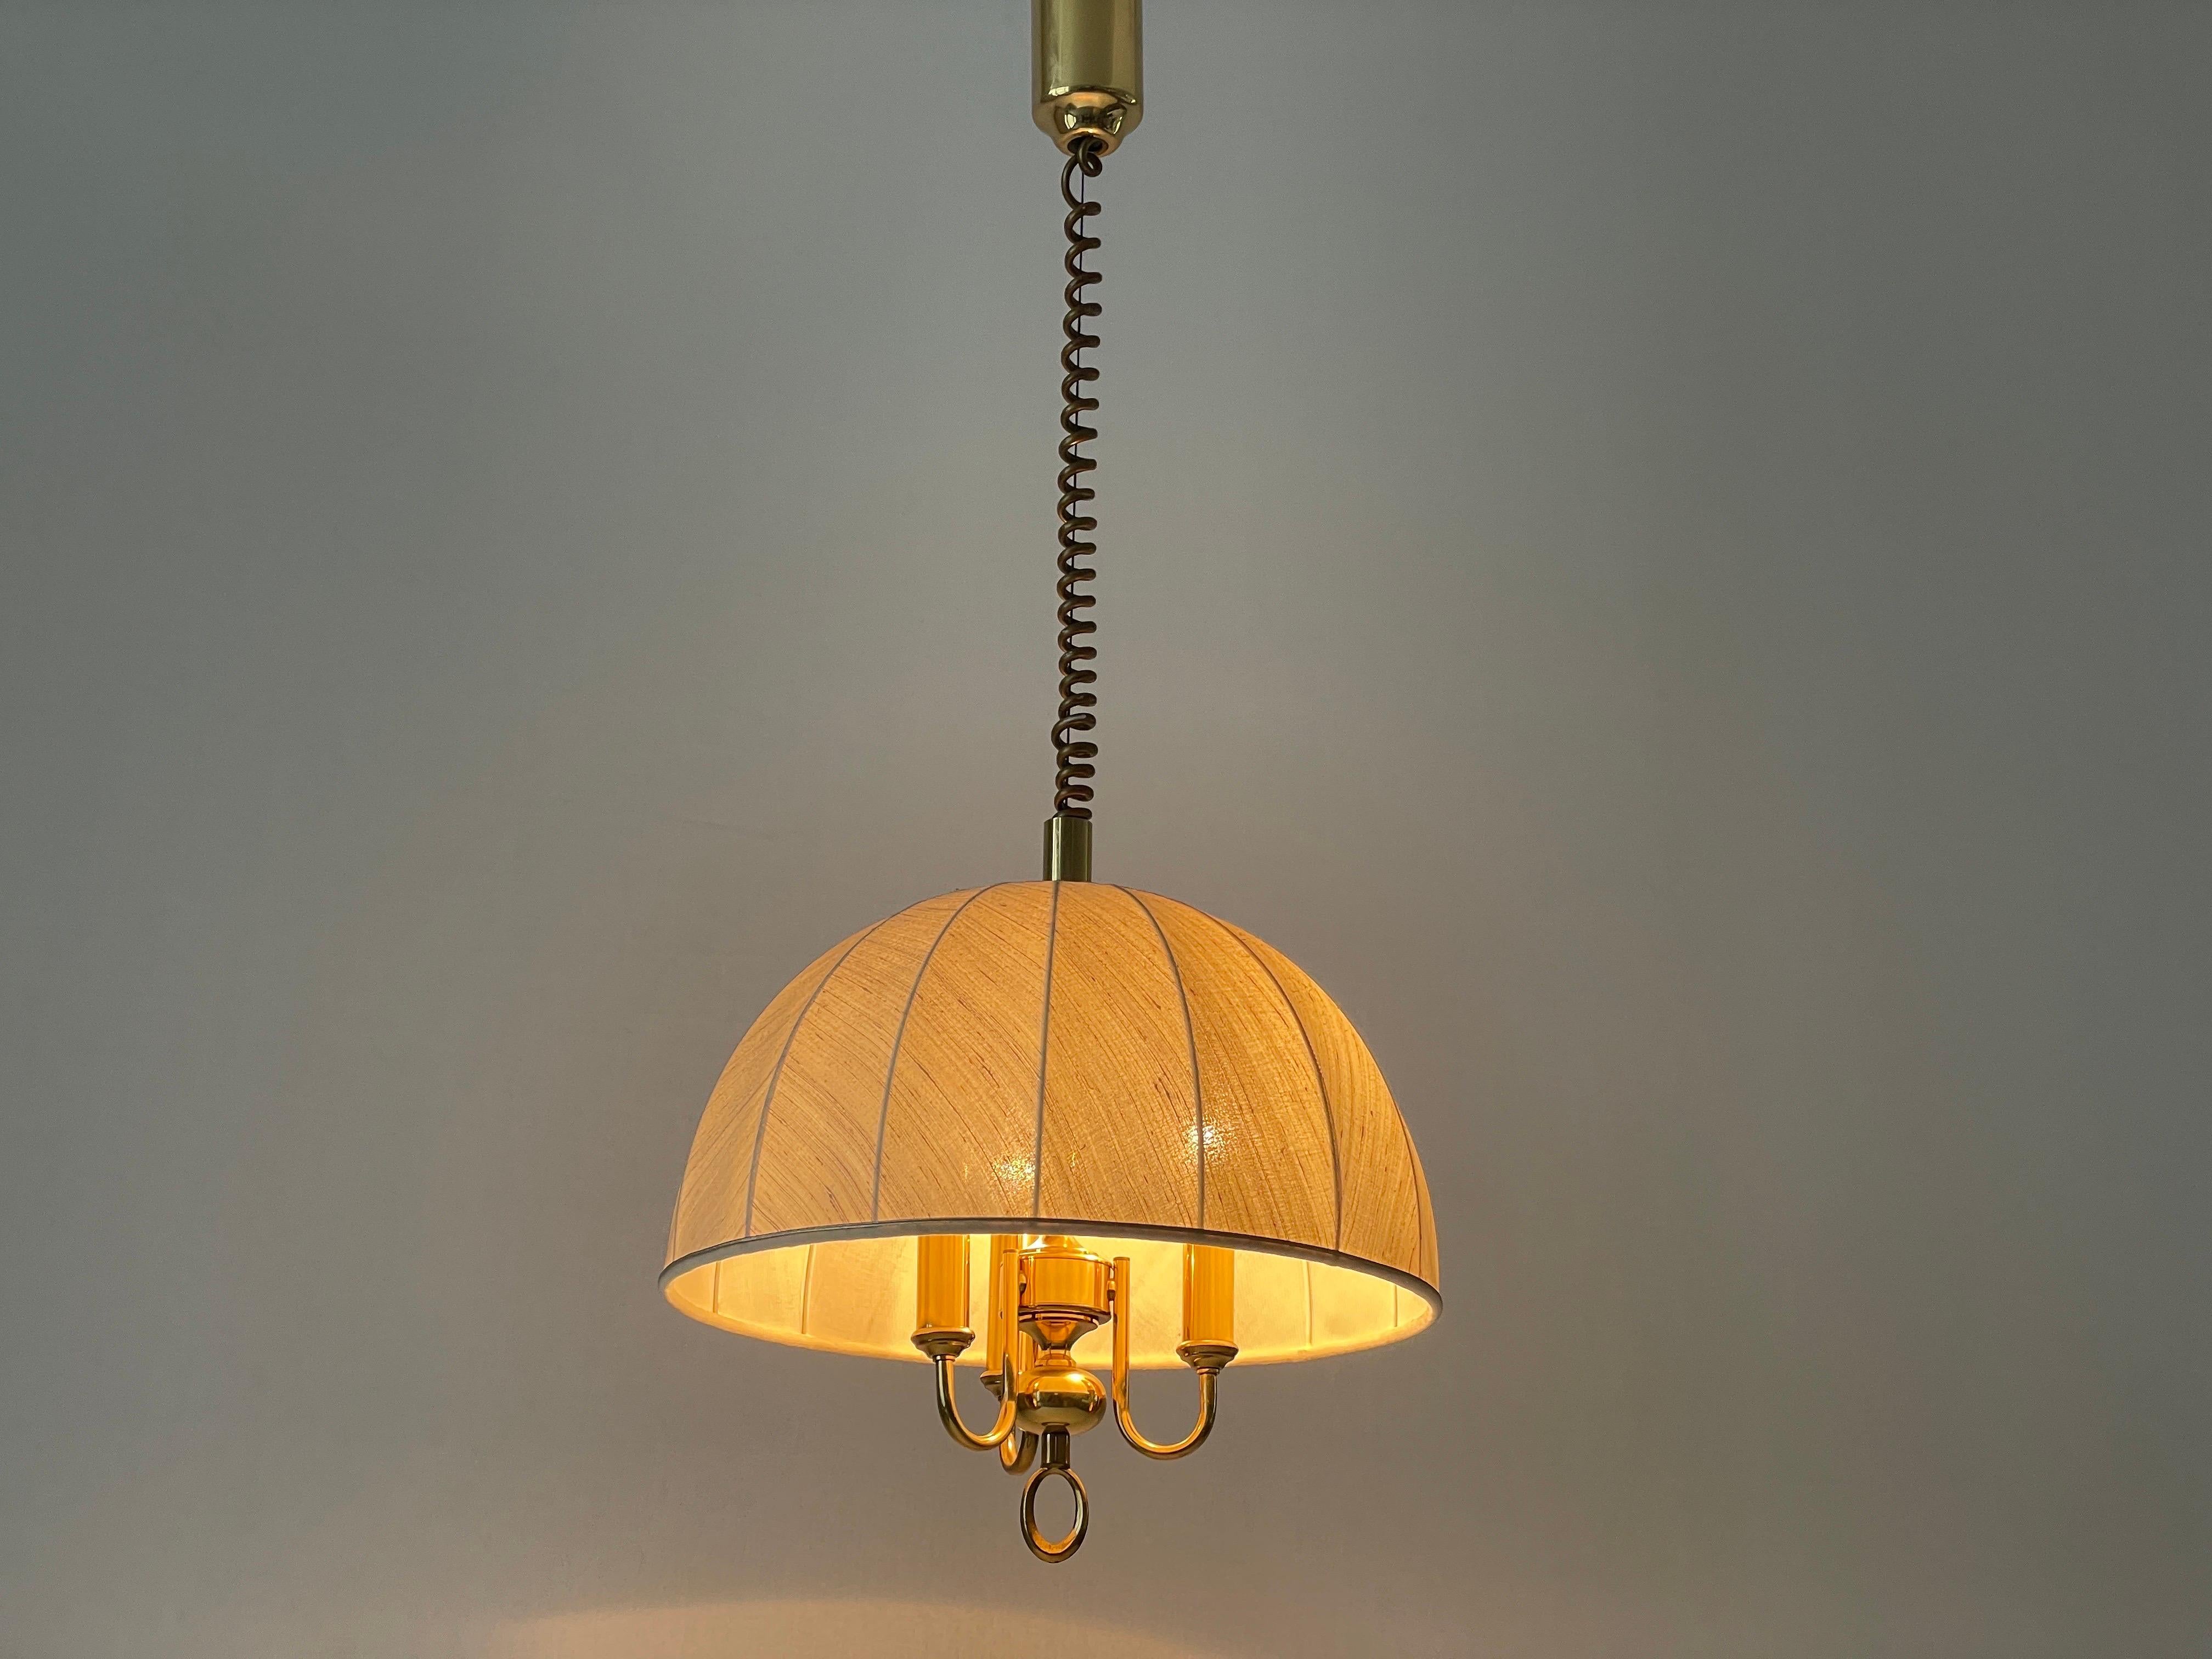 Fabric and Brass 3 socket Adjustable Shade Pendant Lamp by WKR, 1970s, Germany For Sale 5